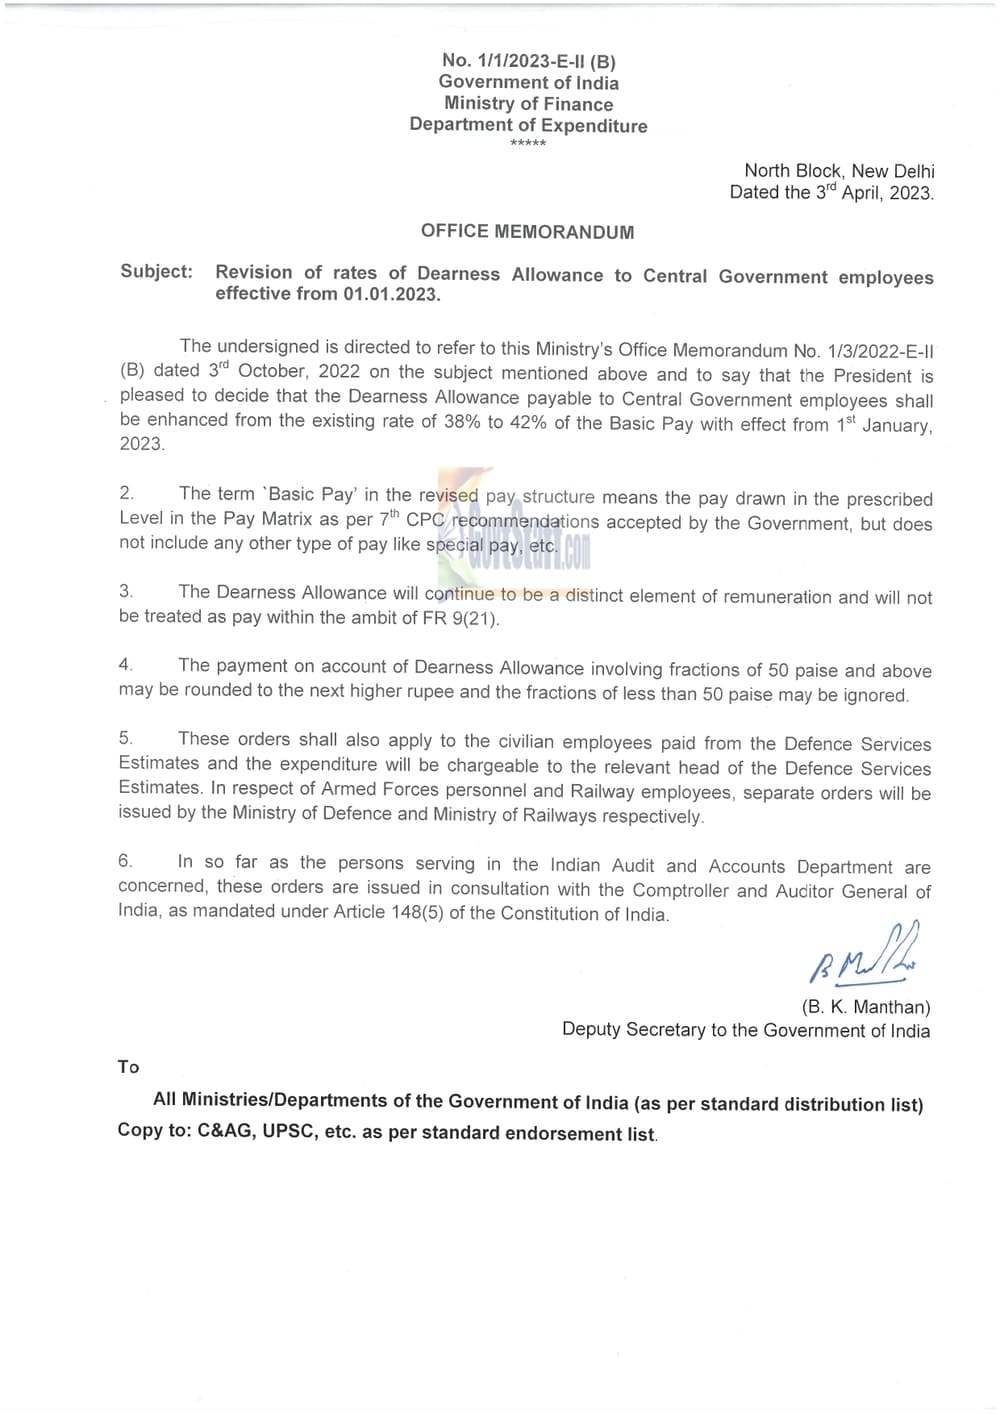 dearness-allowance-rates-revised-from-38-to-42-of-the-basic-pay-with-effect-from-1st-january-2023-finmin-o-m-dated-03-04-2023